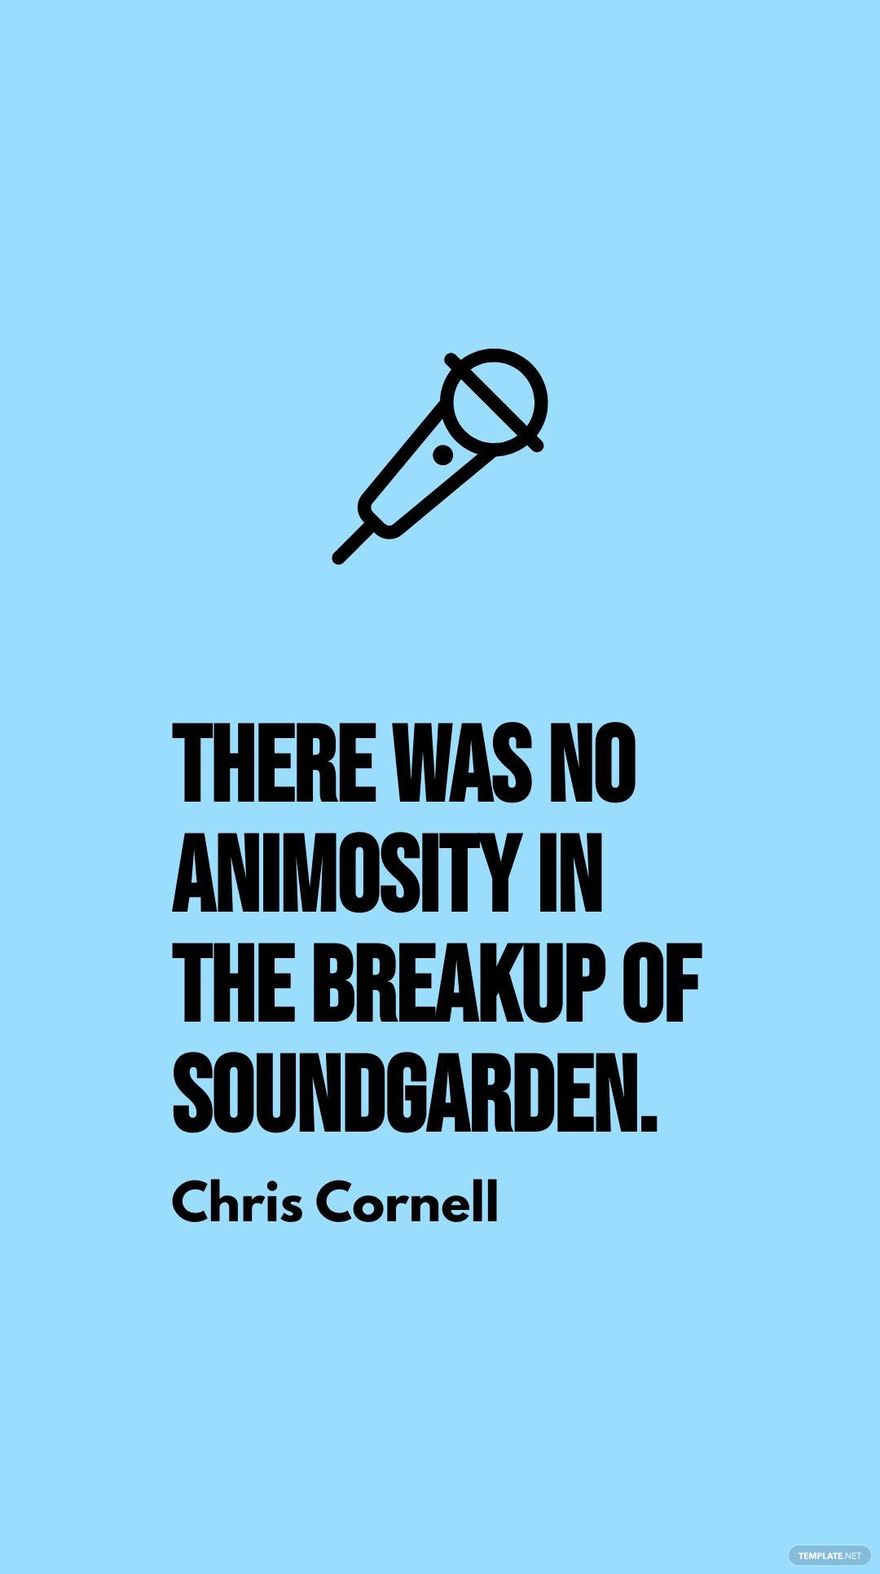 Chris Cornell - There was no animosity in the breakup of Soundgarden. in JPG